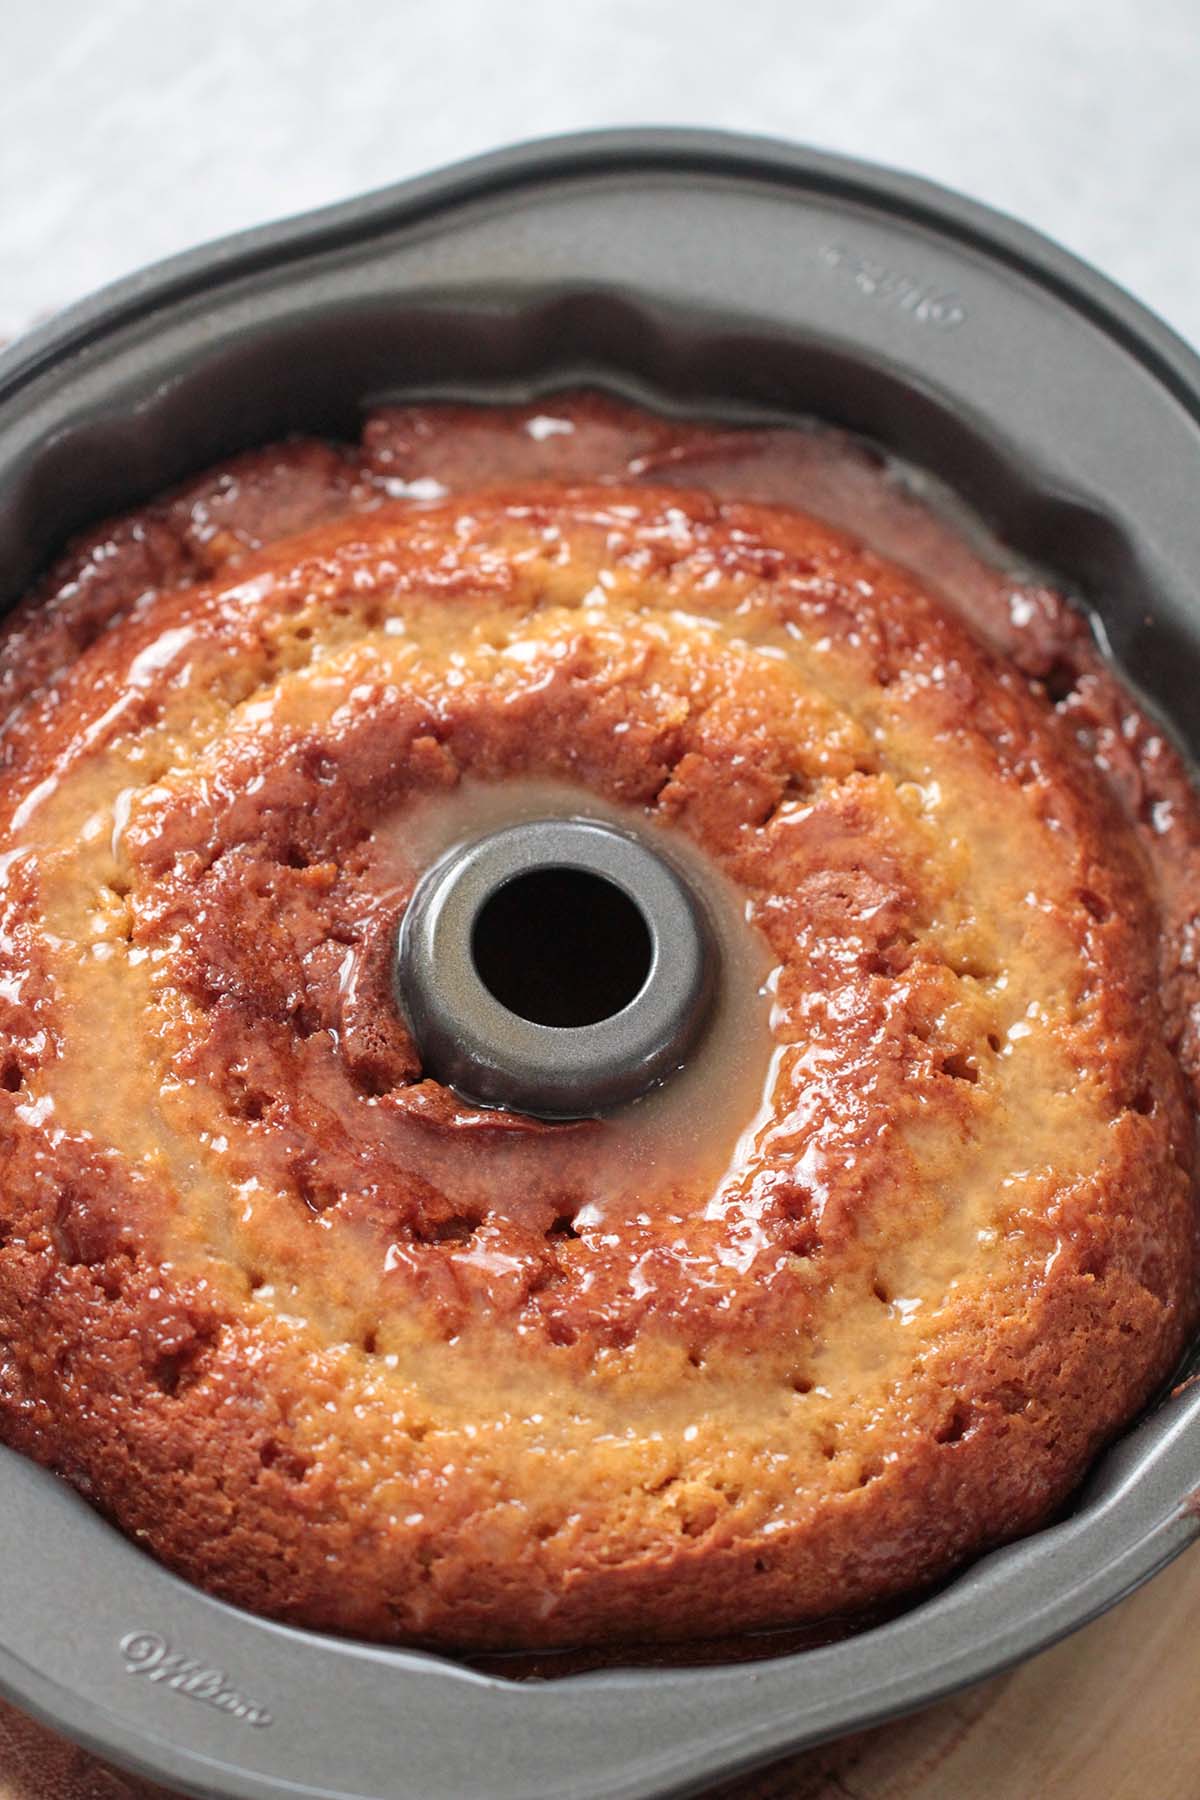 Top Tips On How To Use A Bundt Pan + Best Bundt Cake Recipes